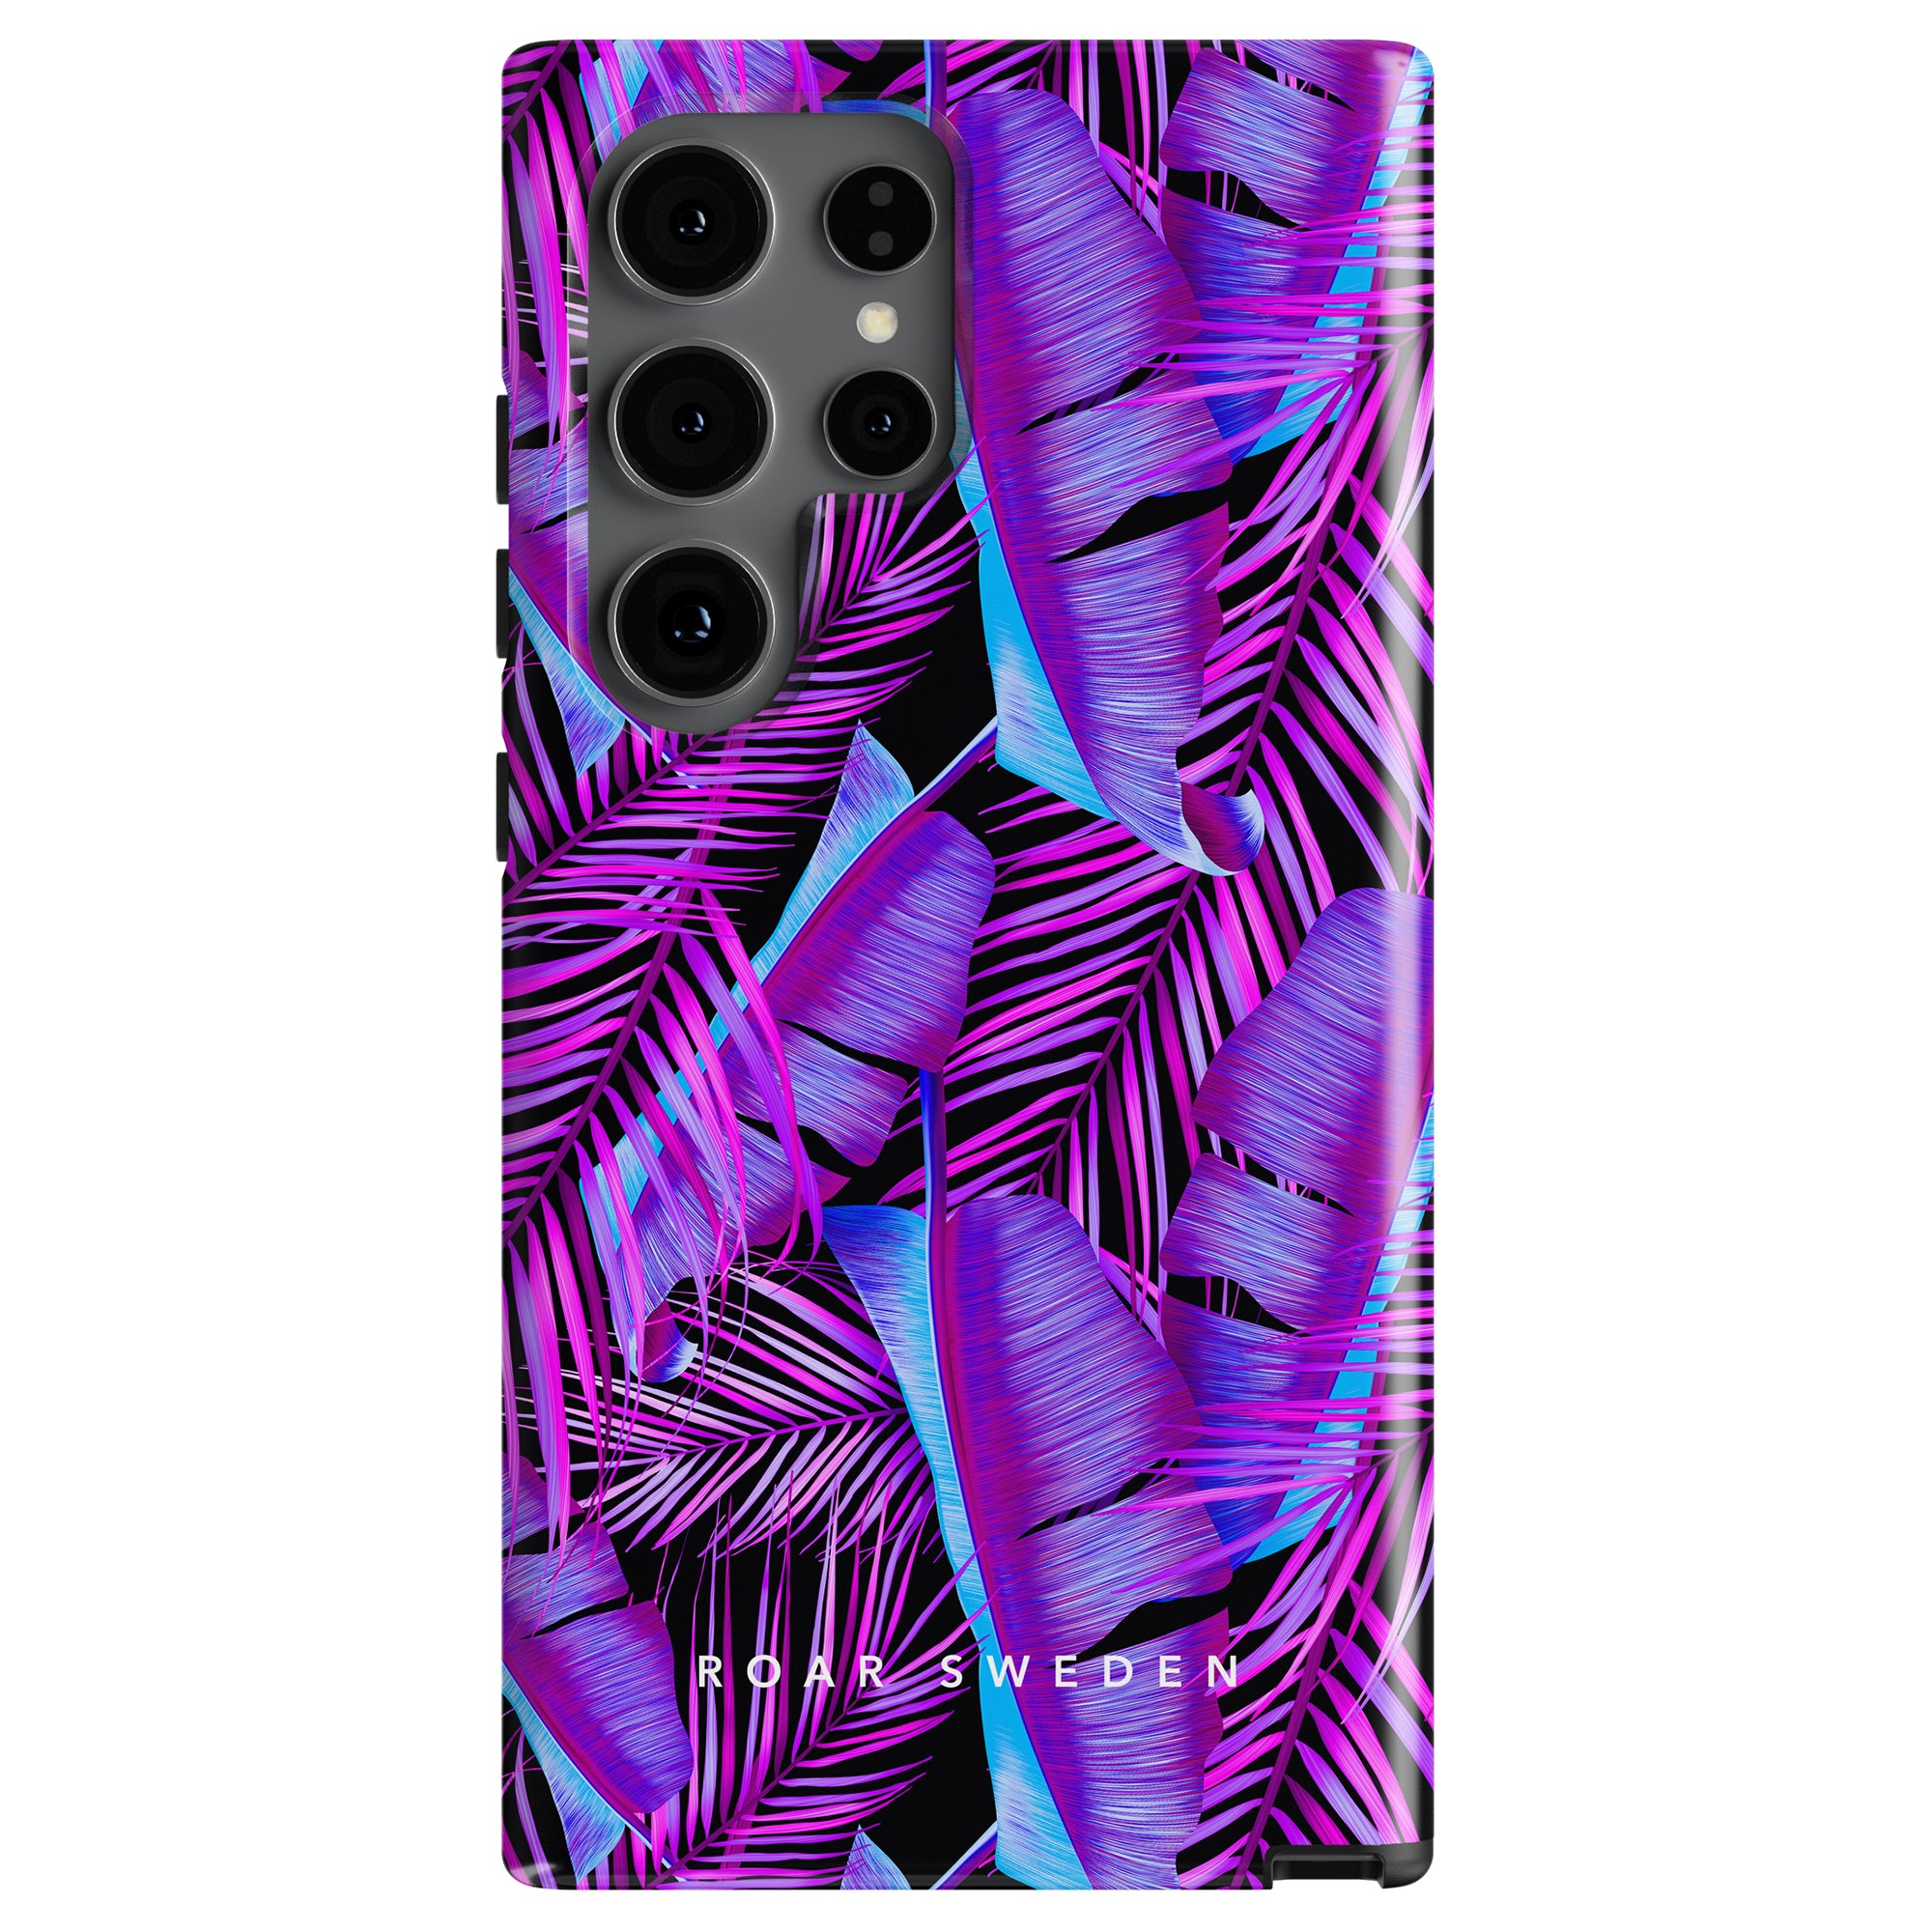 Smartphone case with an exotisk look, featuring purple and blue tropical leaves and the text "ROAR SWEDEN" at the bottom. This Tropical Vibes - Tough case blends vibrant design with Tropical Vibes mobilskal appeal.